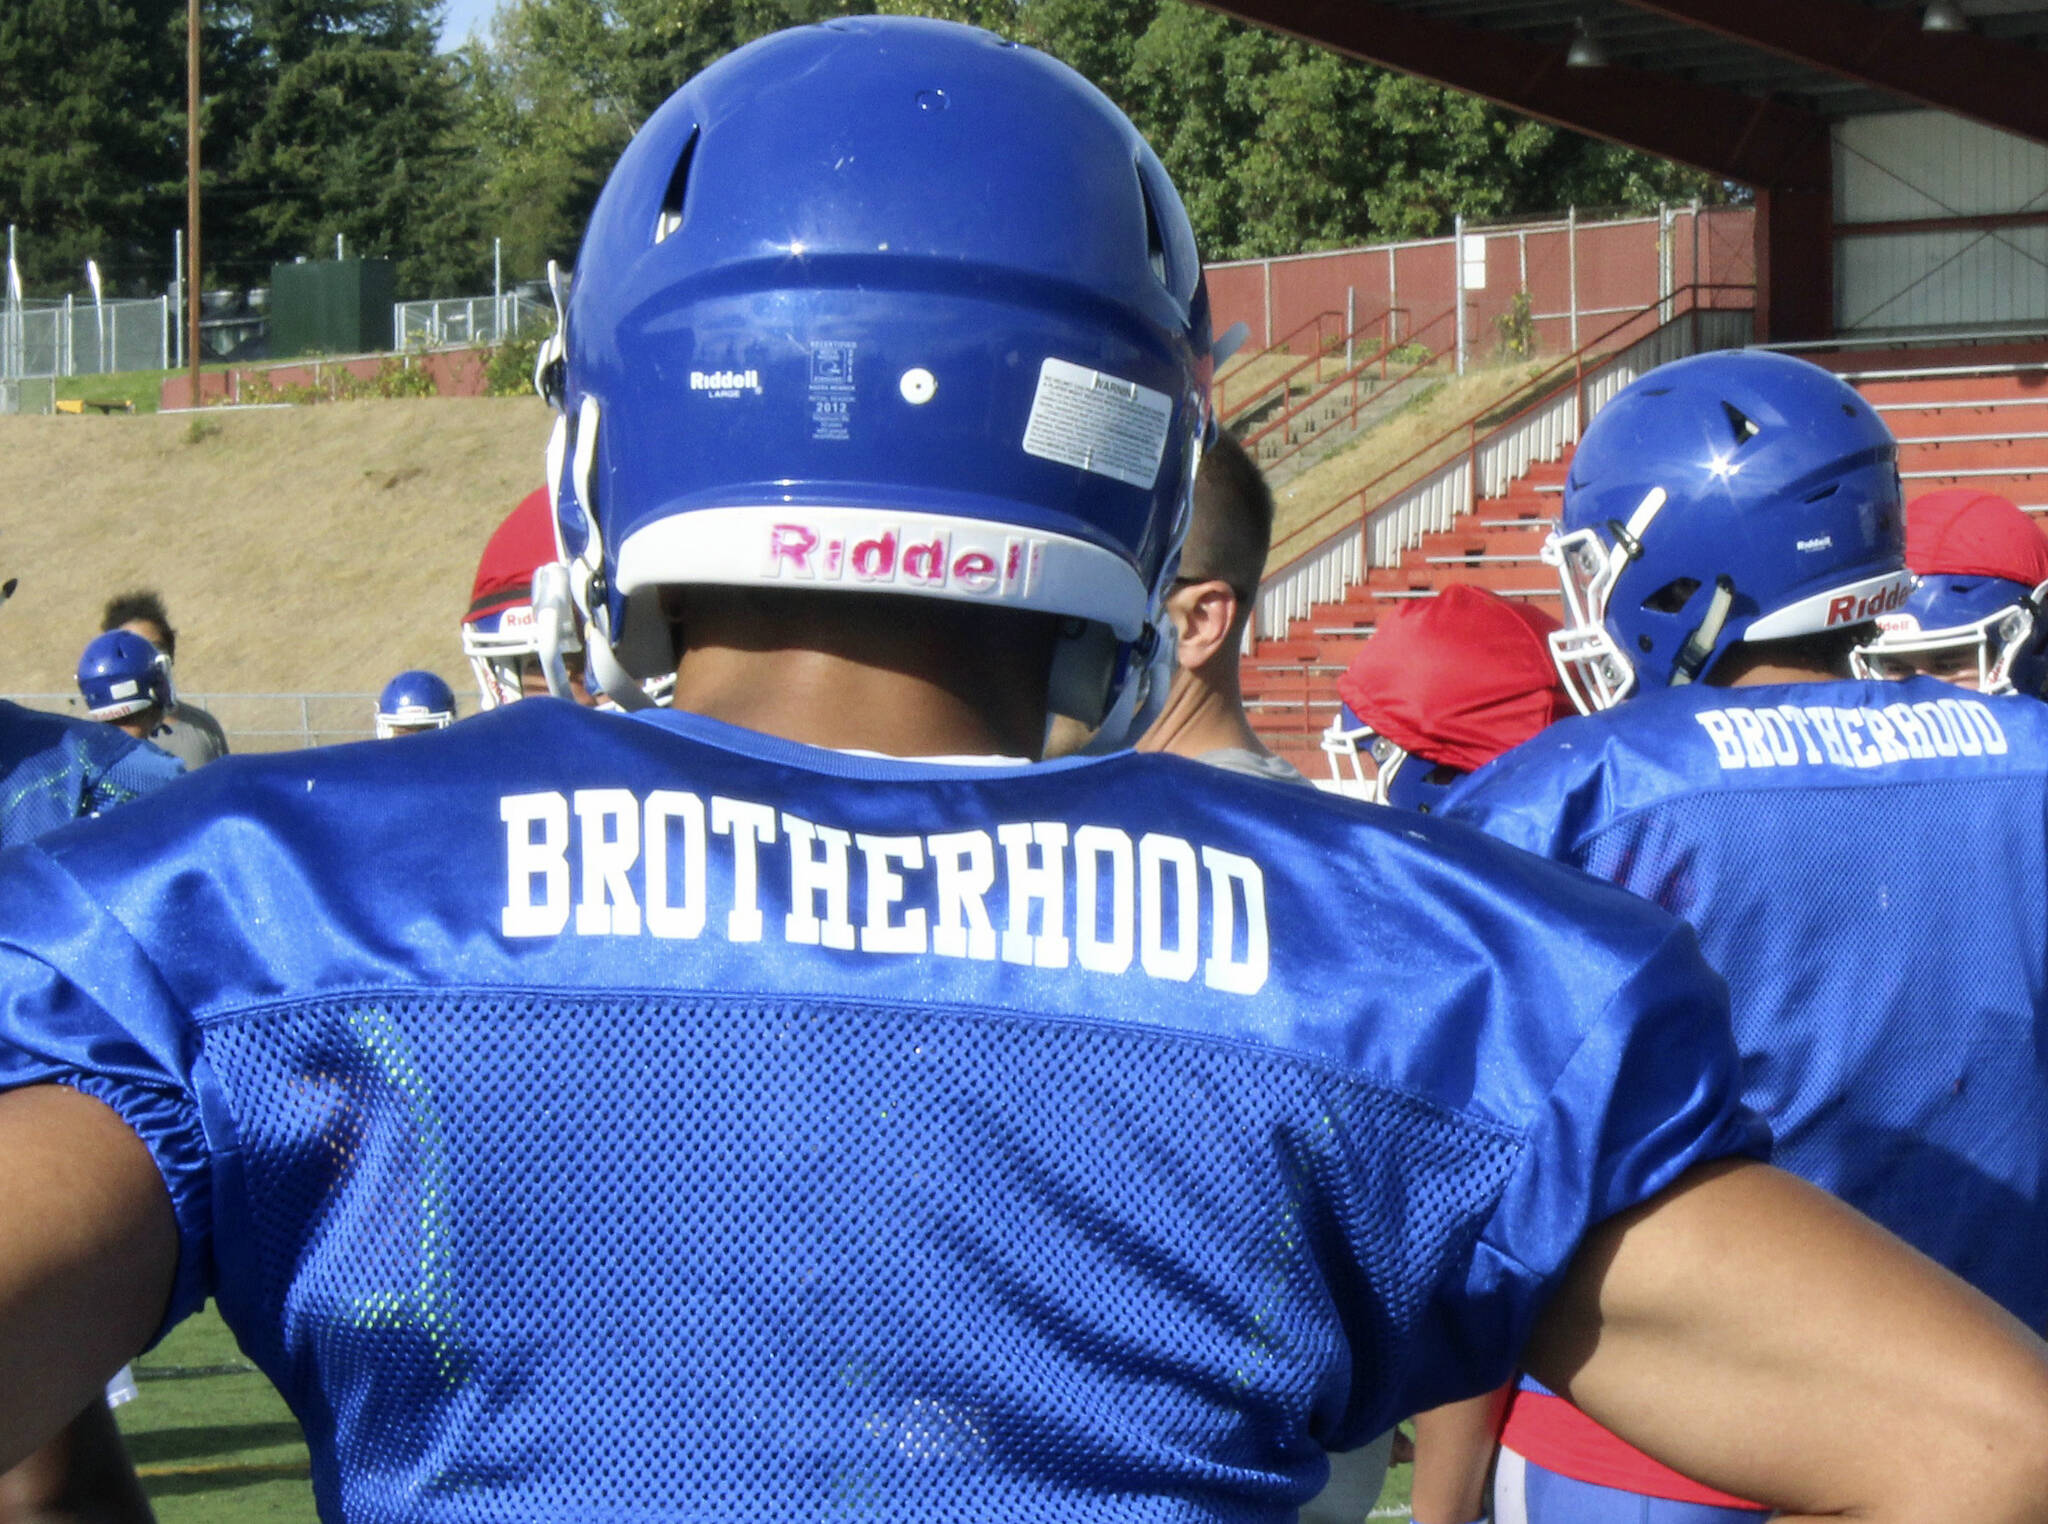 The Federal Way High School football team wears practice jerseys with the word “brotherhood” on the back to honor former teammate Allen Harris. File Photo by Olivia Sullivan, Sound Publishing